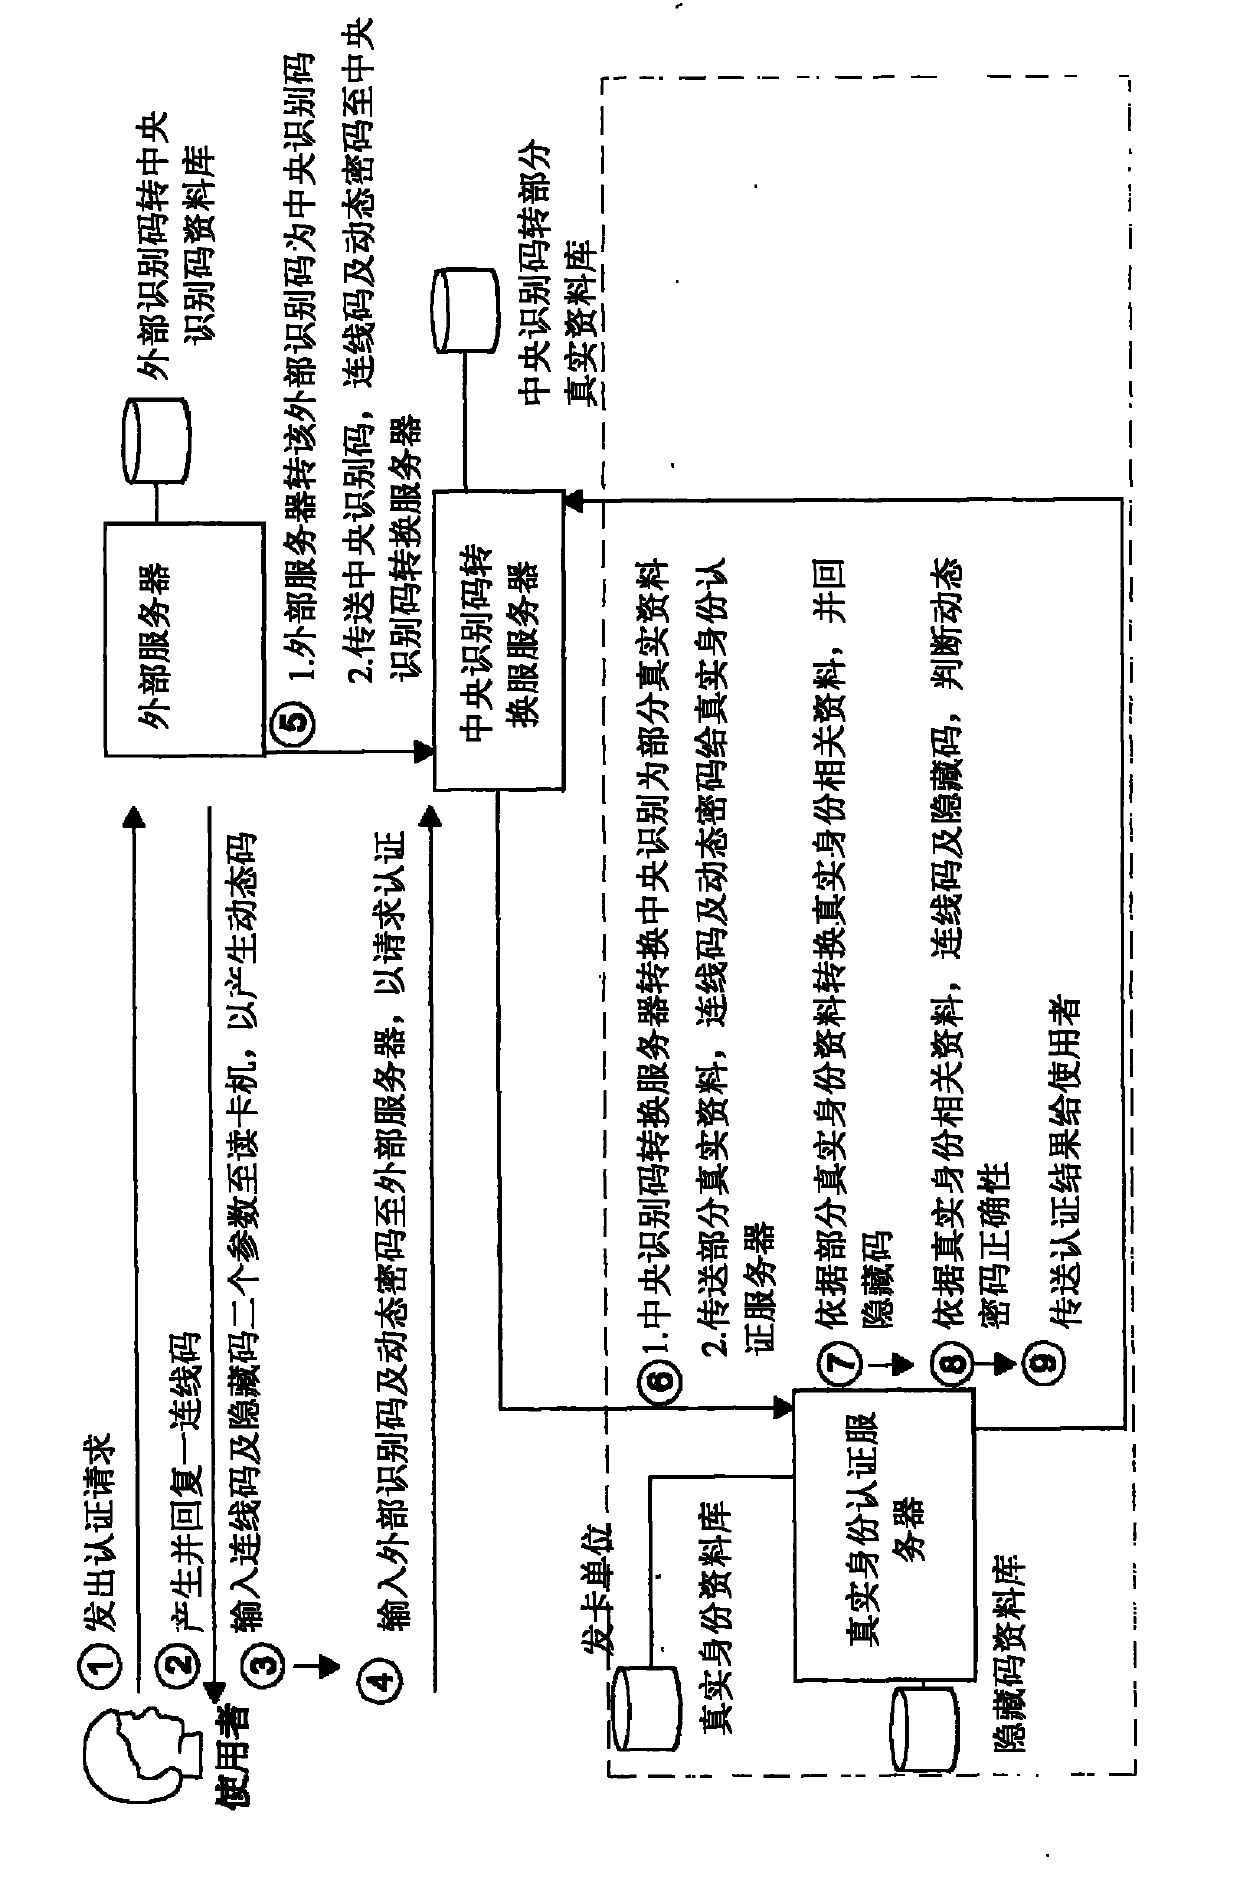 Multi-layer data mapping authentication system